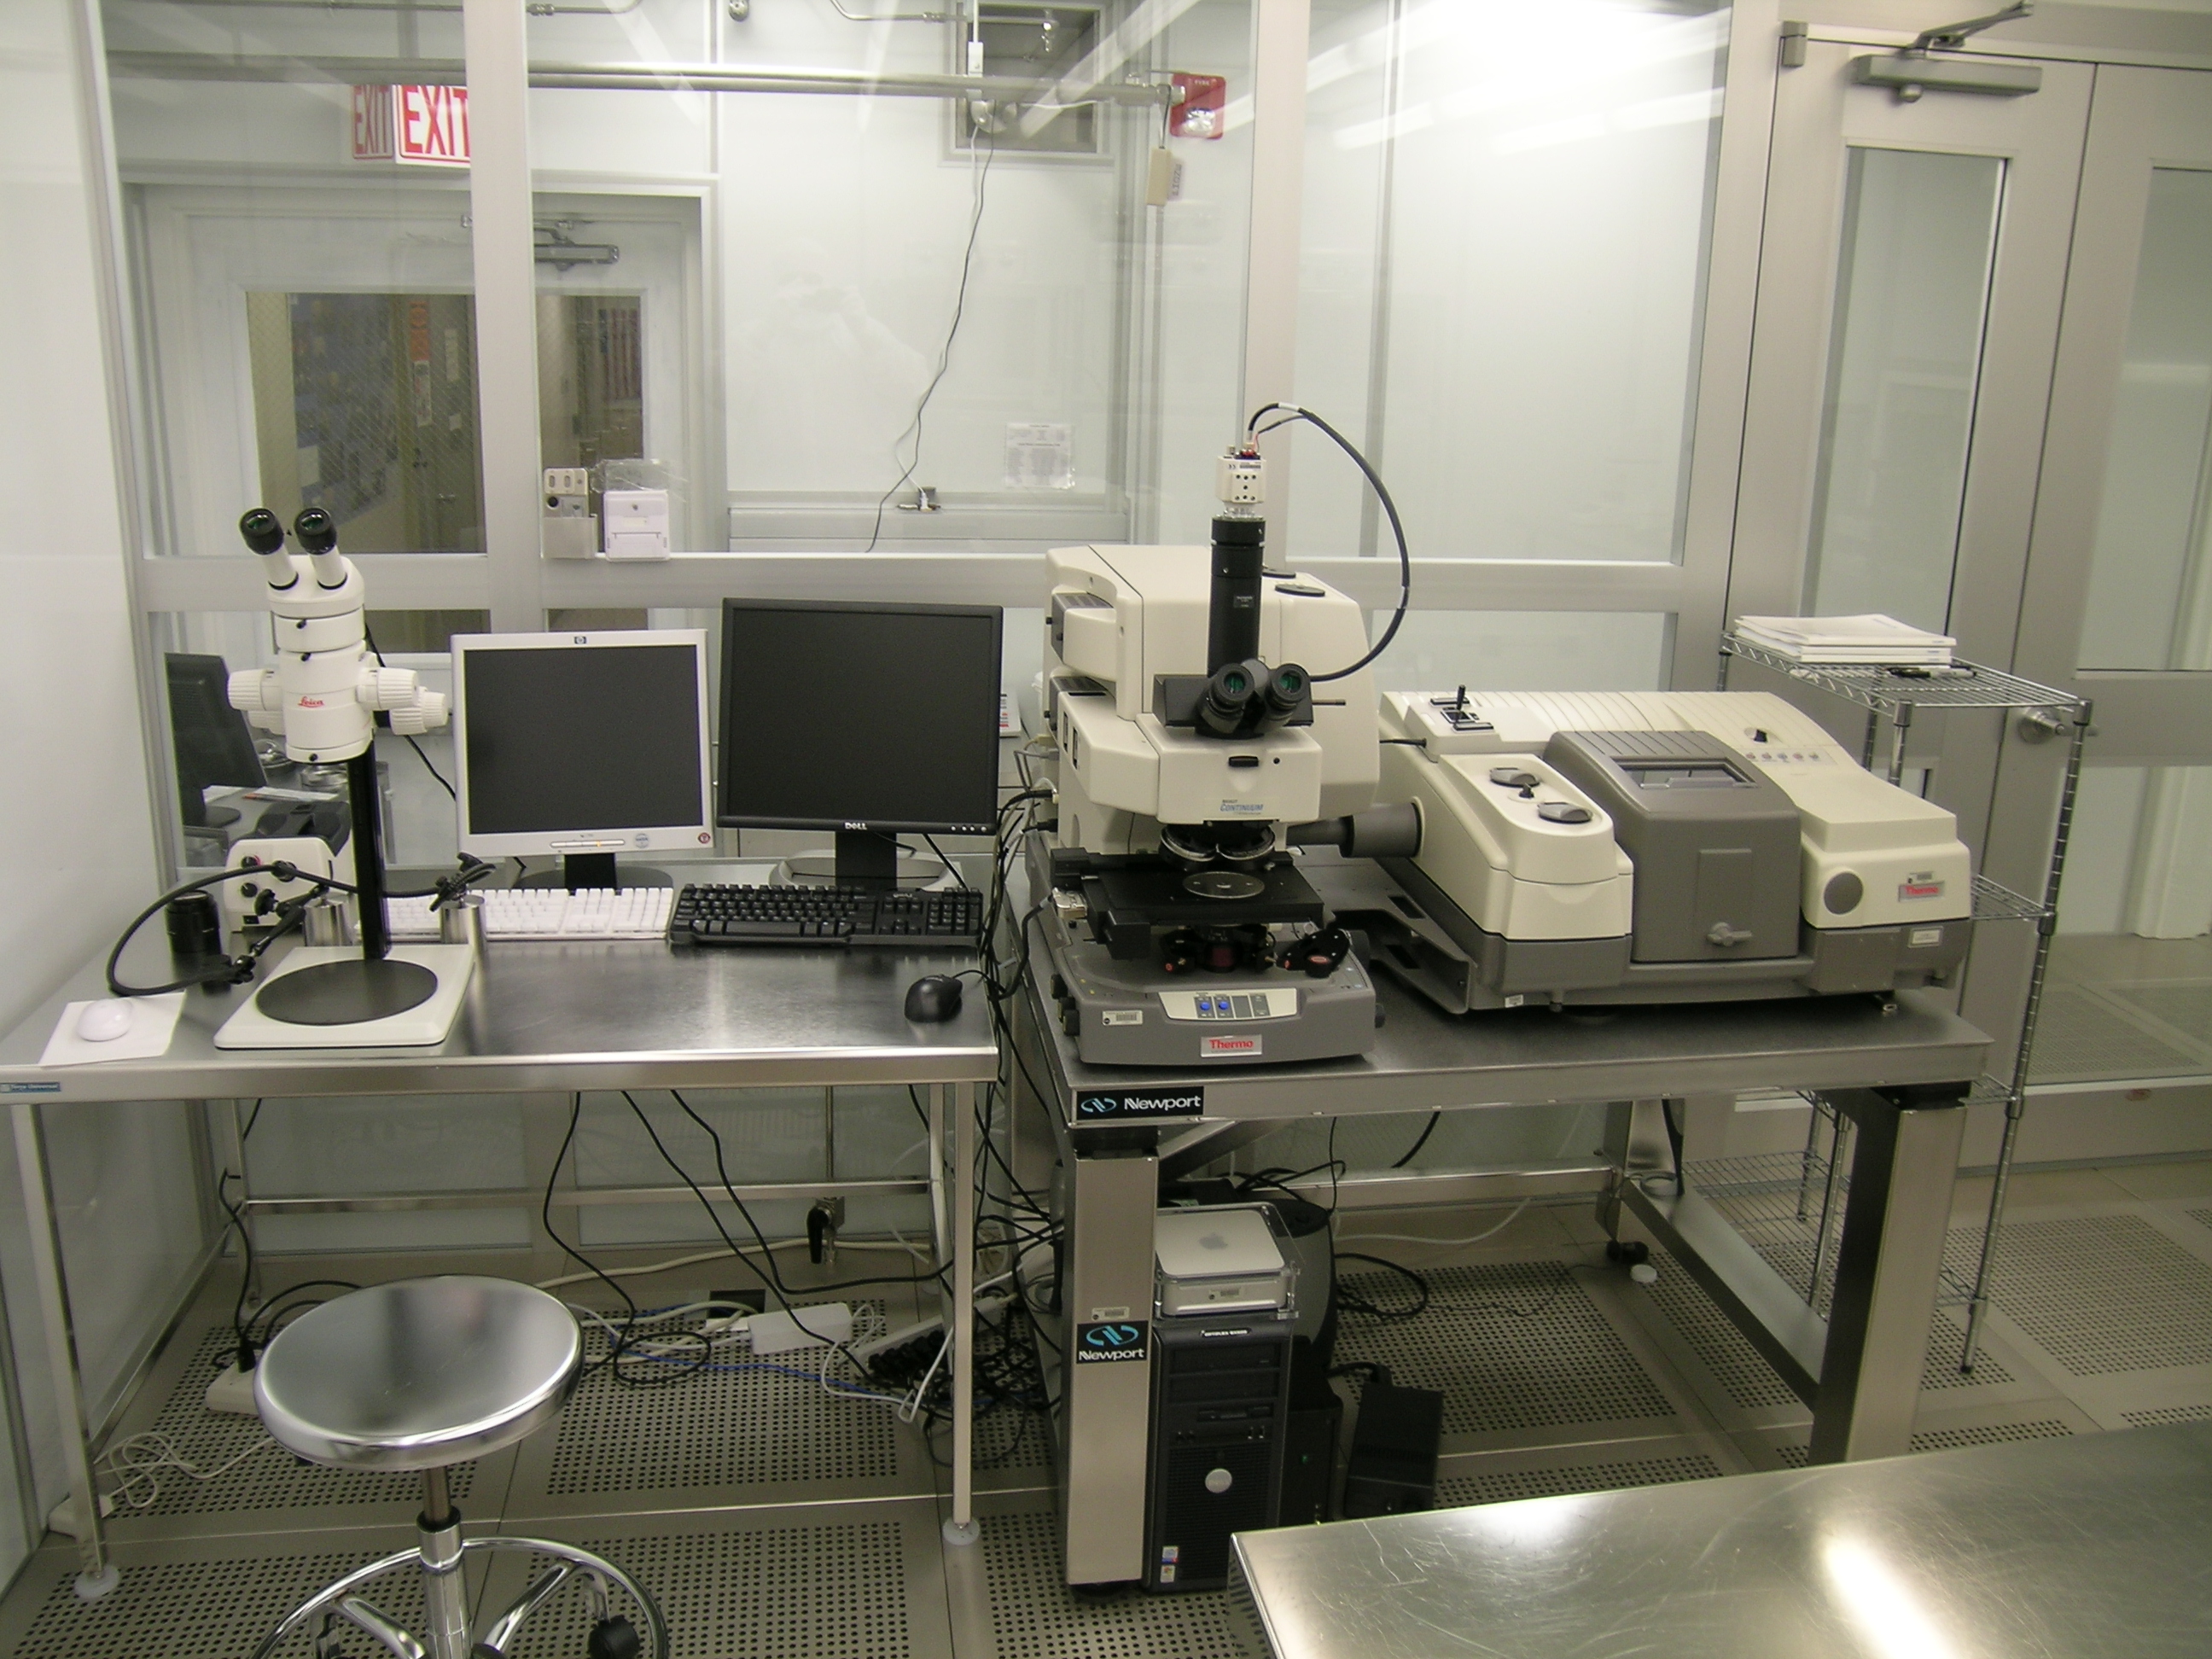 FTIR Spectrometer and Stereo microscope used for sample characterization